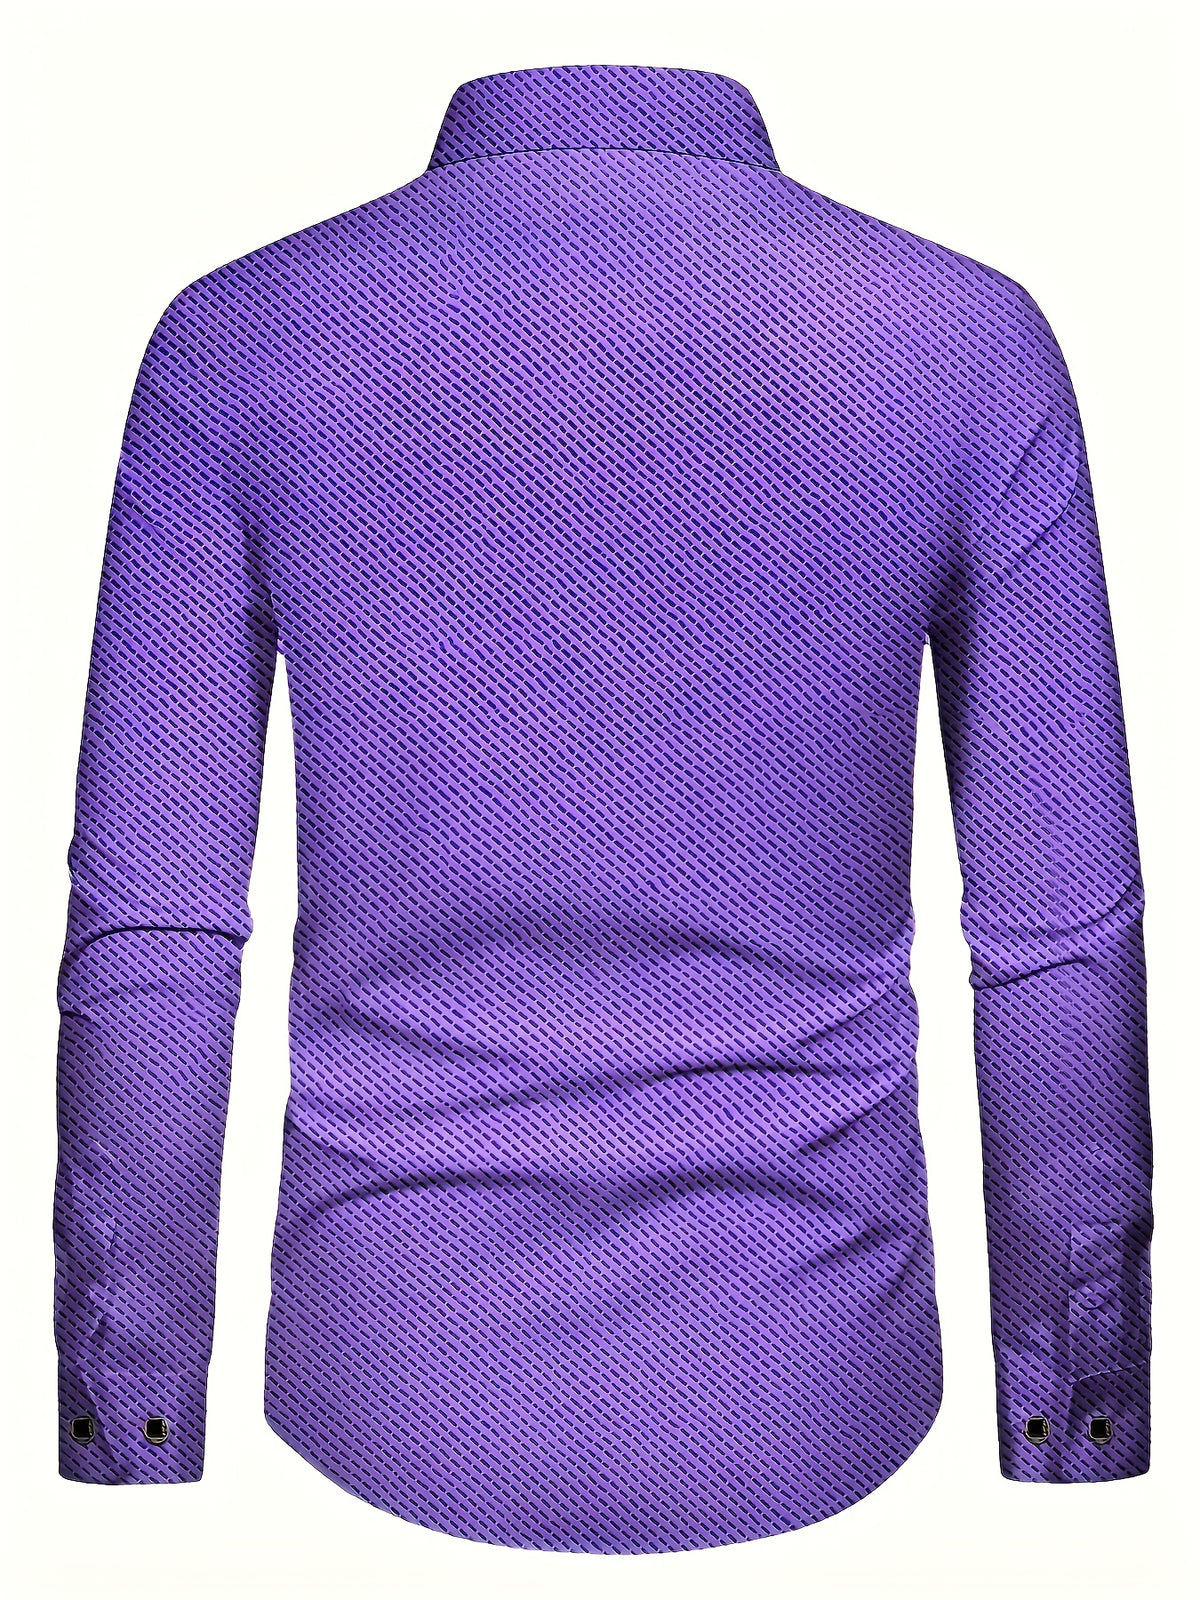 a purple shirt with a pattern on it